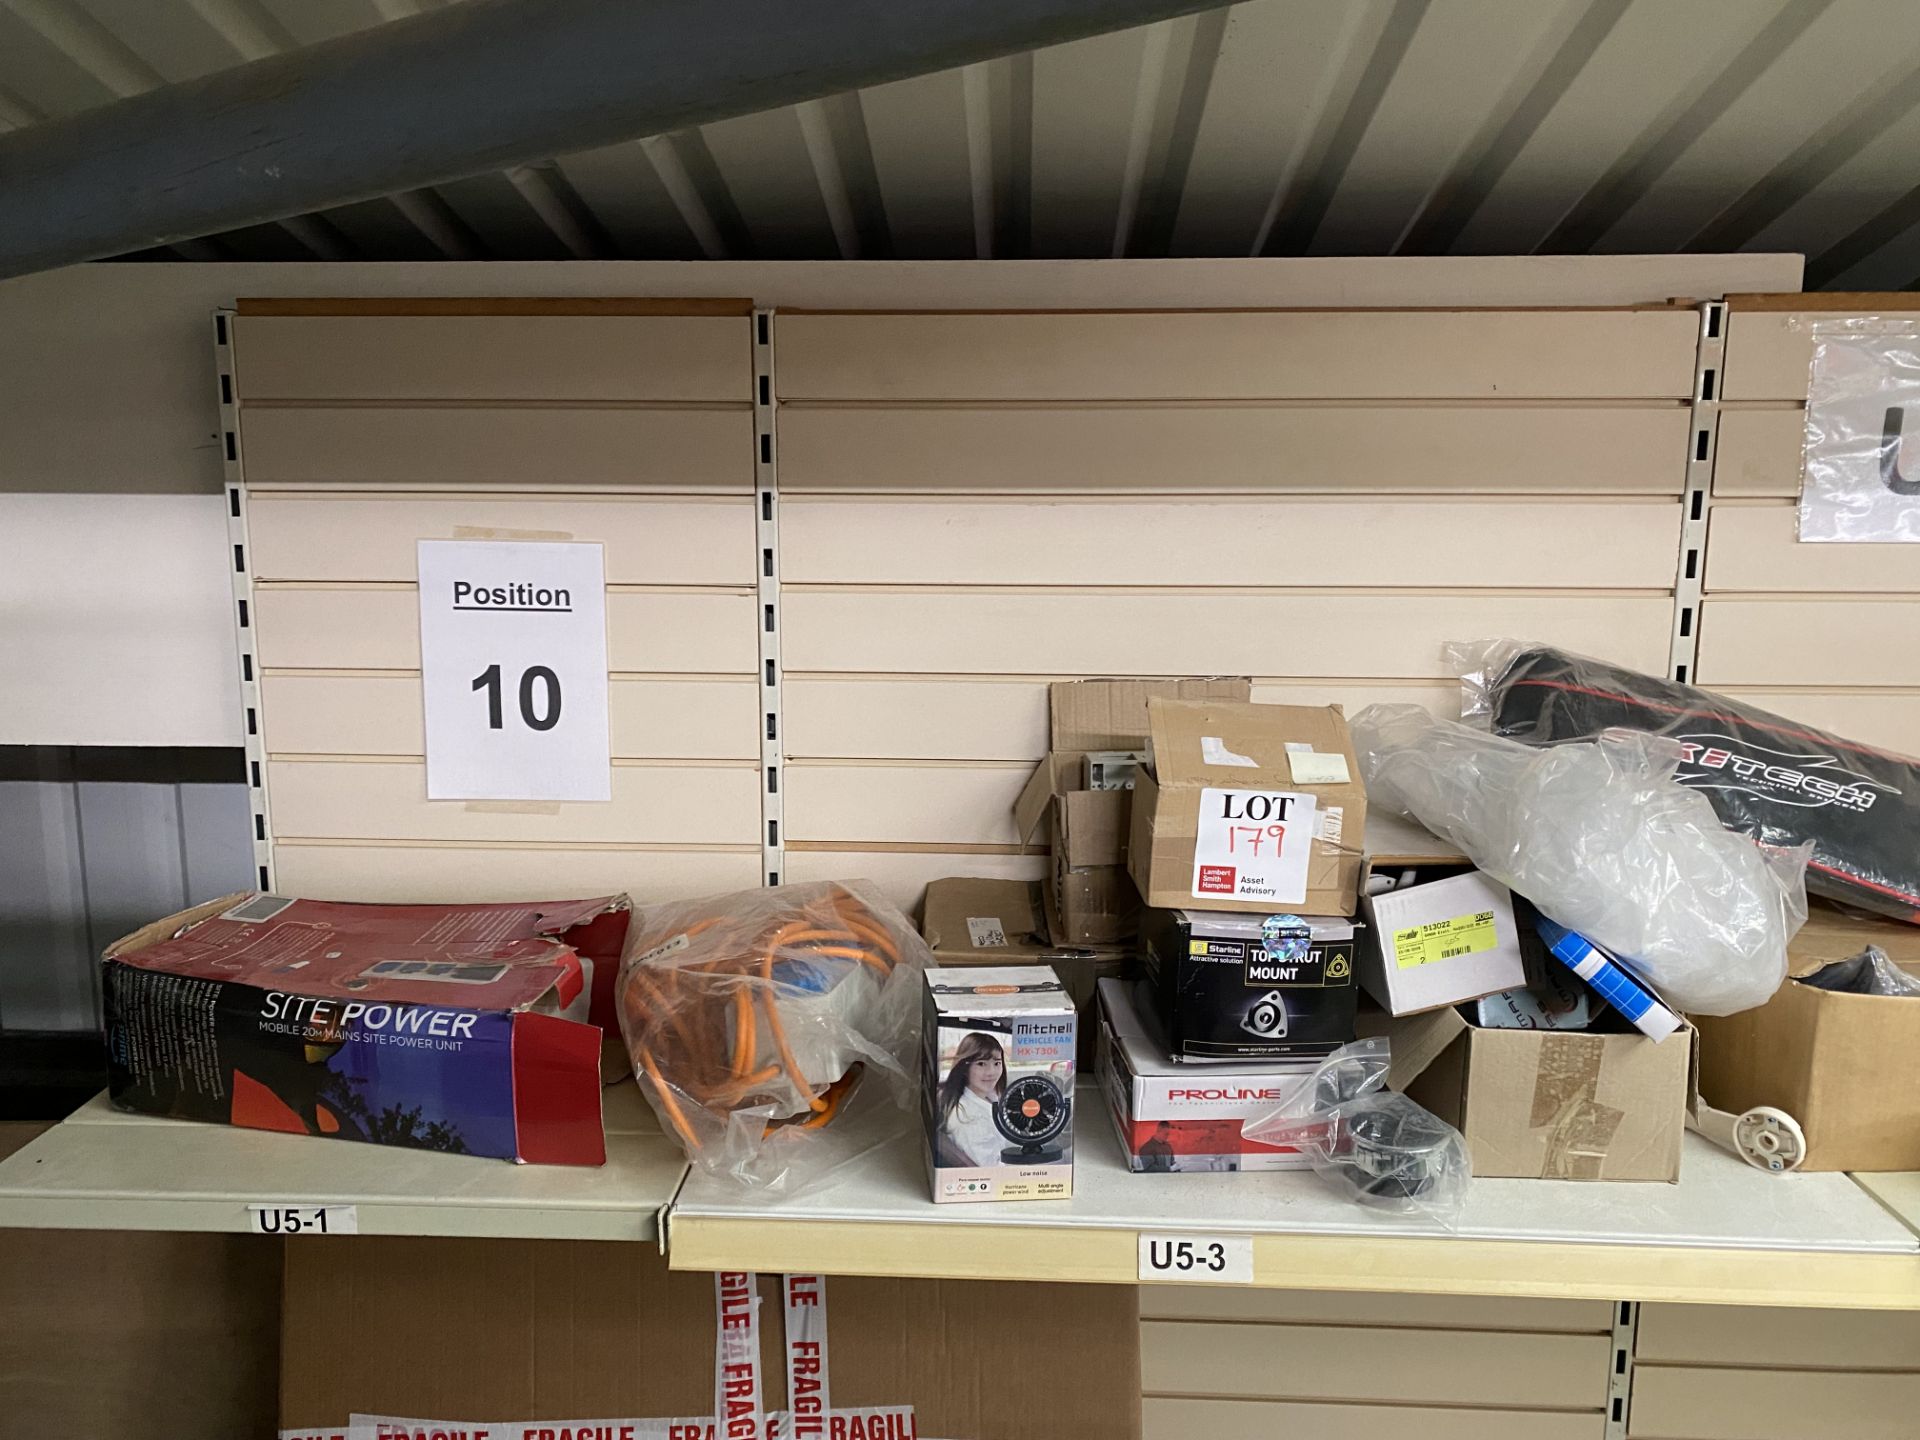 Contents of shelf to include motorhome accessories, electrical mobile mains site power unit, 20m